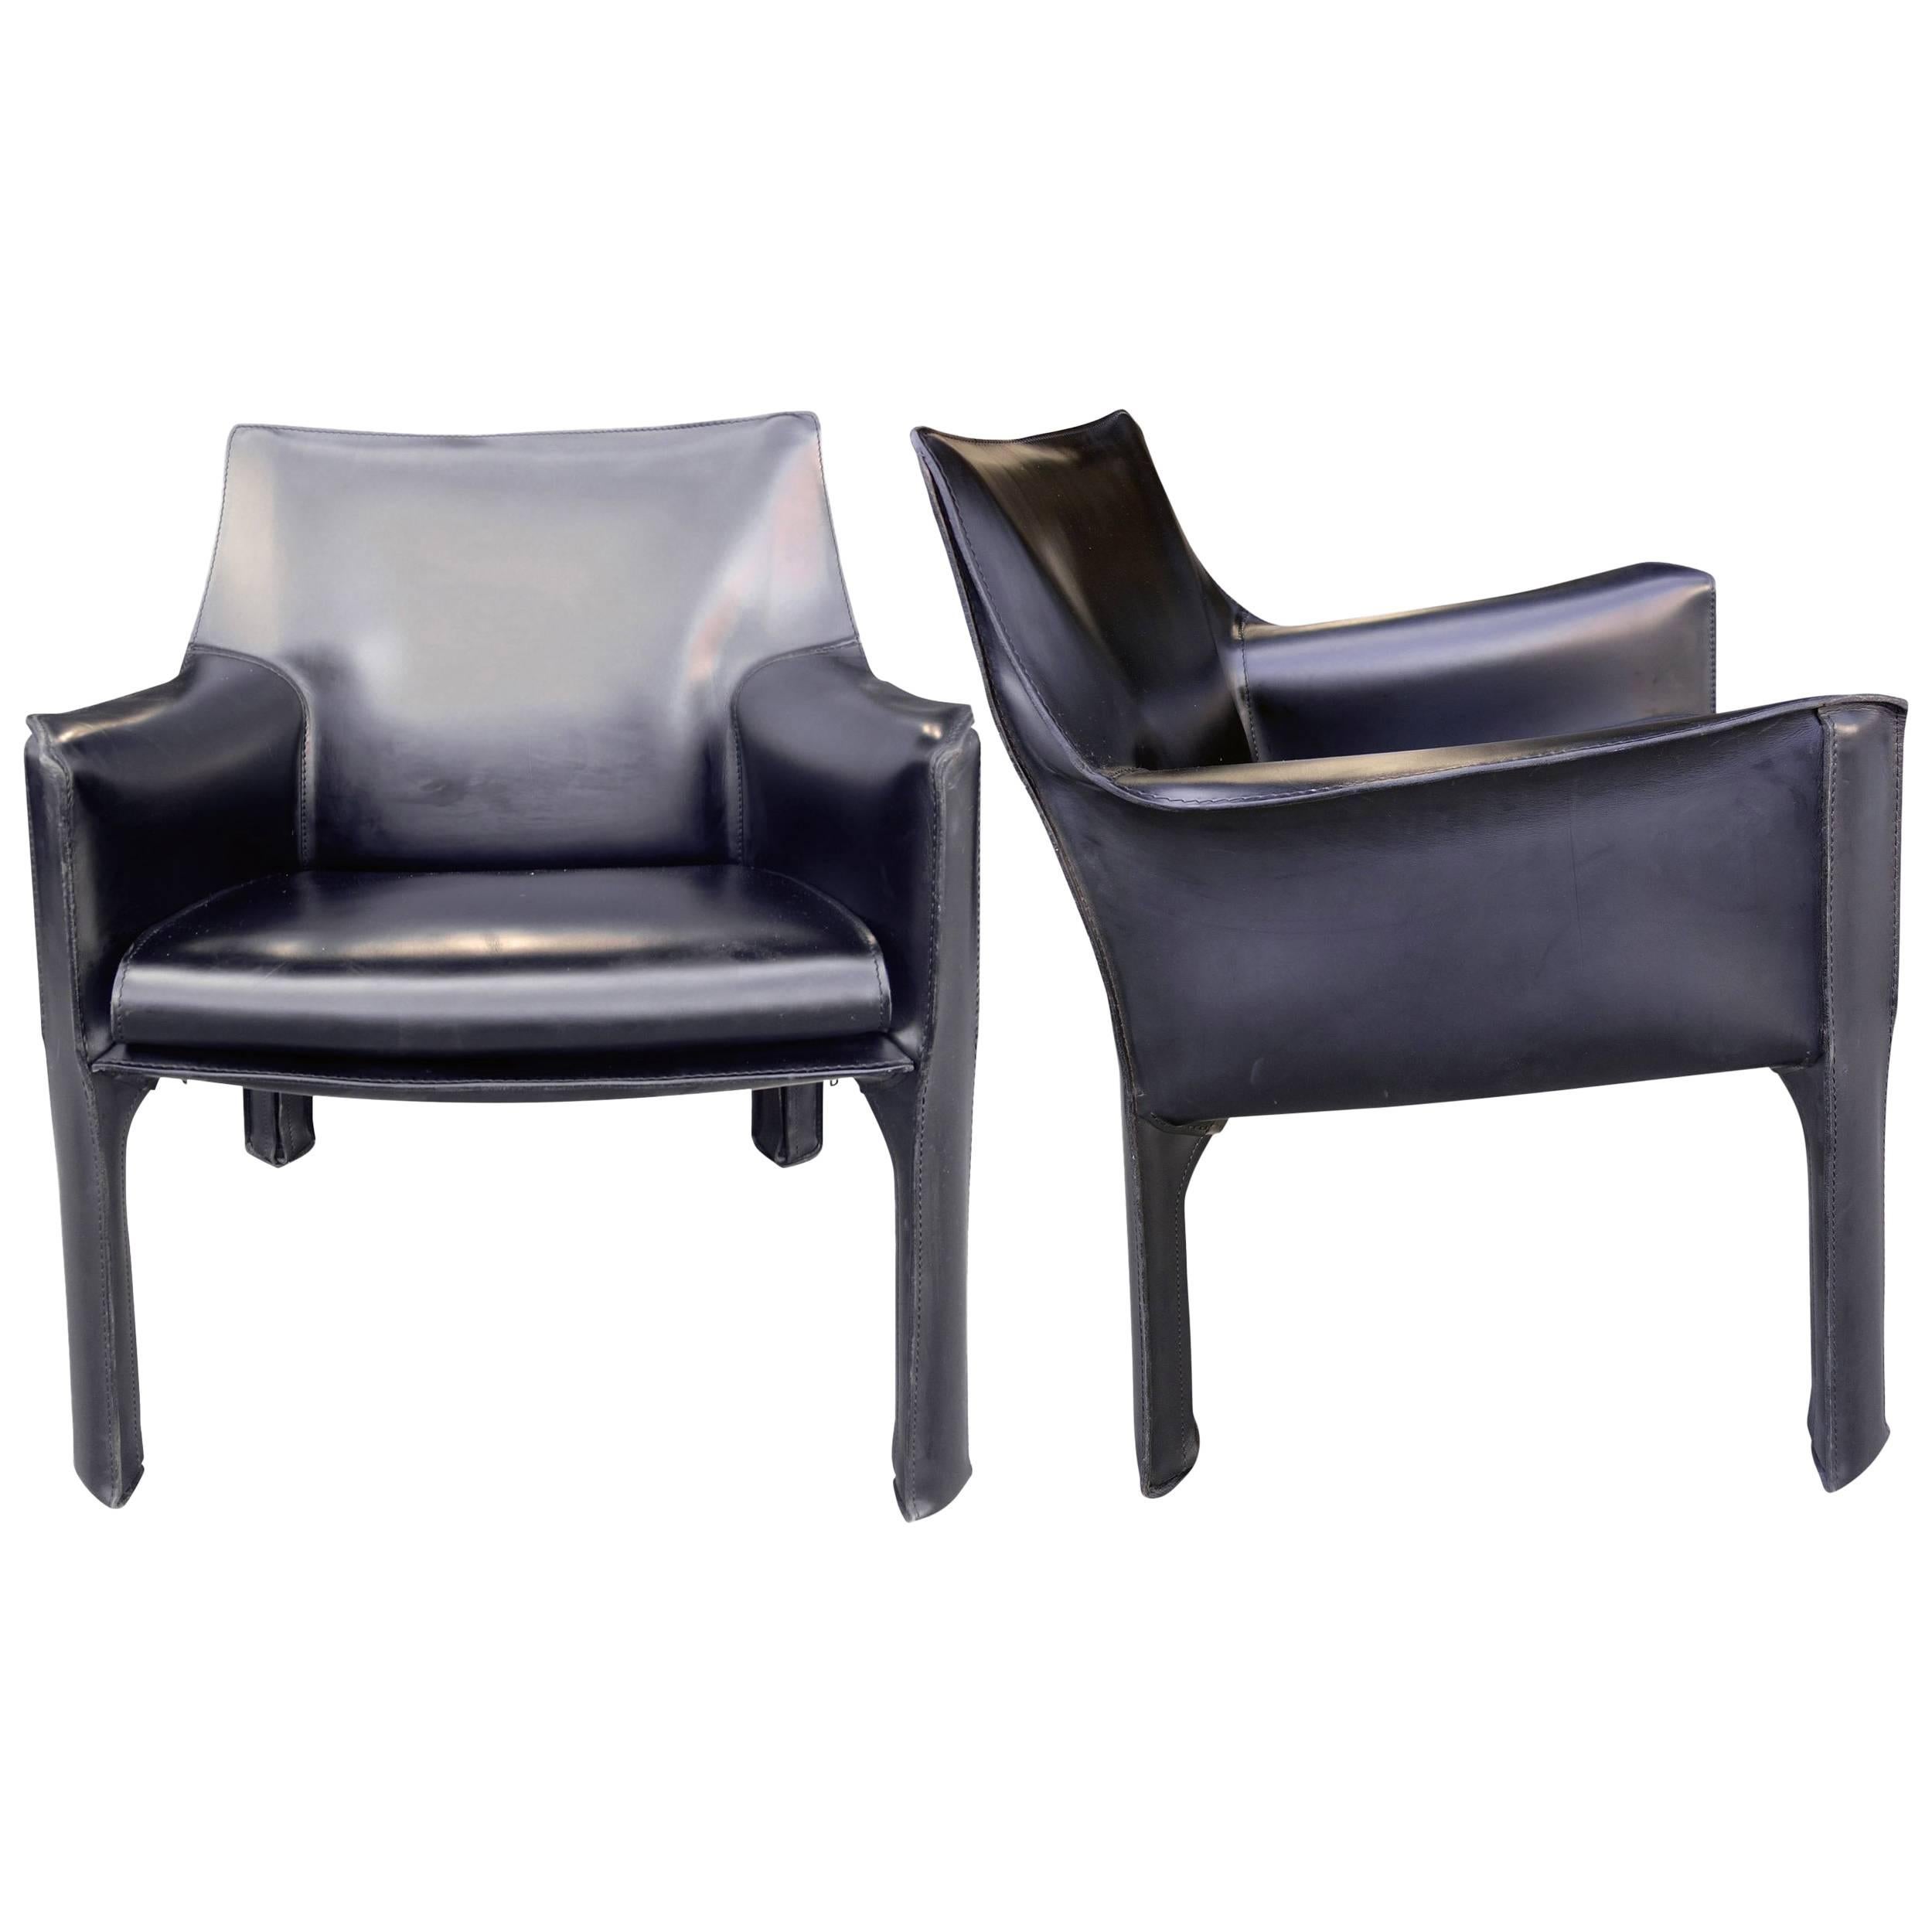 Listing is for one midcentury Mario Bellini Cab 414 chair in black saddle leather. Showing very little wear most likely never used. Dimensions are suited as a club, easy, or lounge chair. Incredibly comfortable. 

Measures: Seat height 16.5